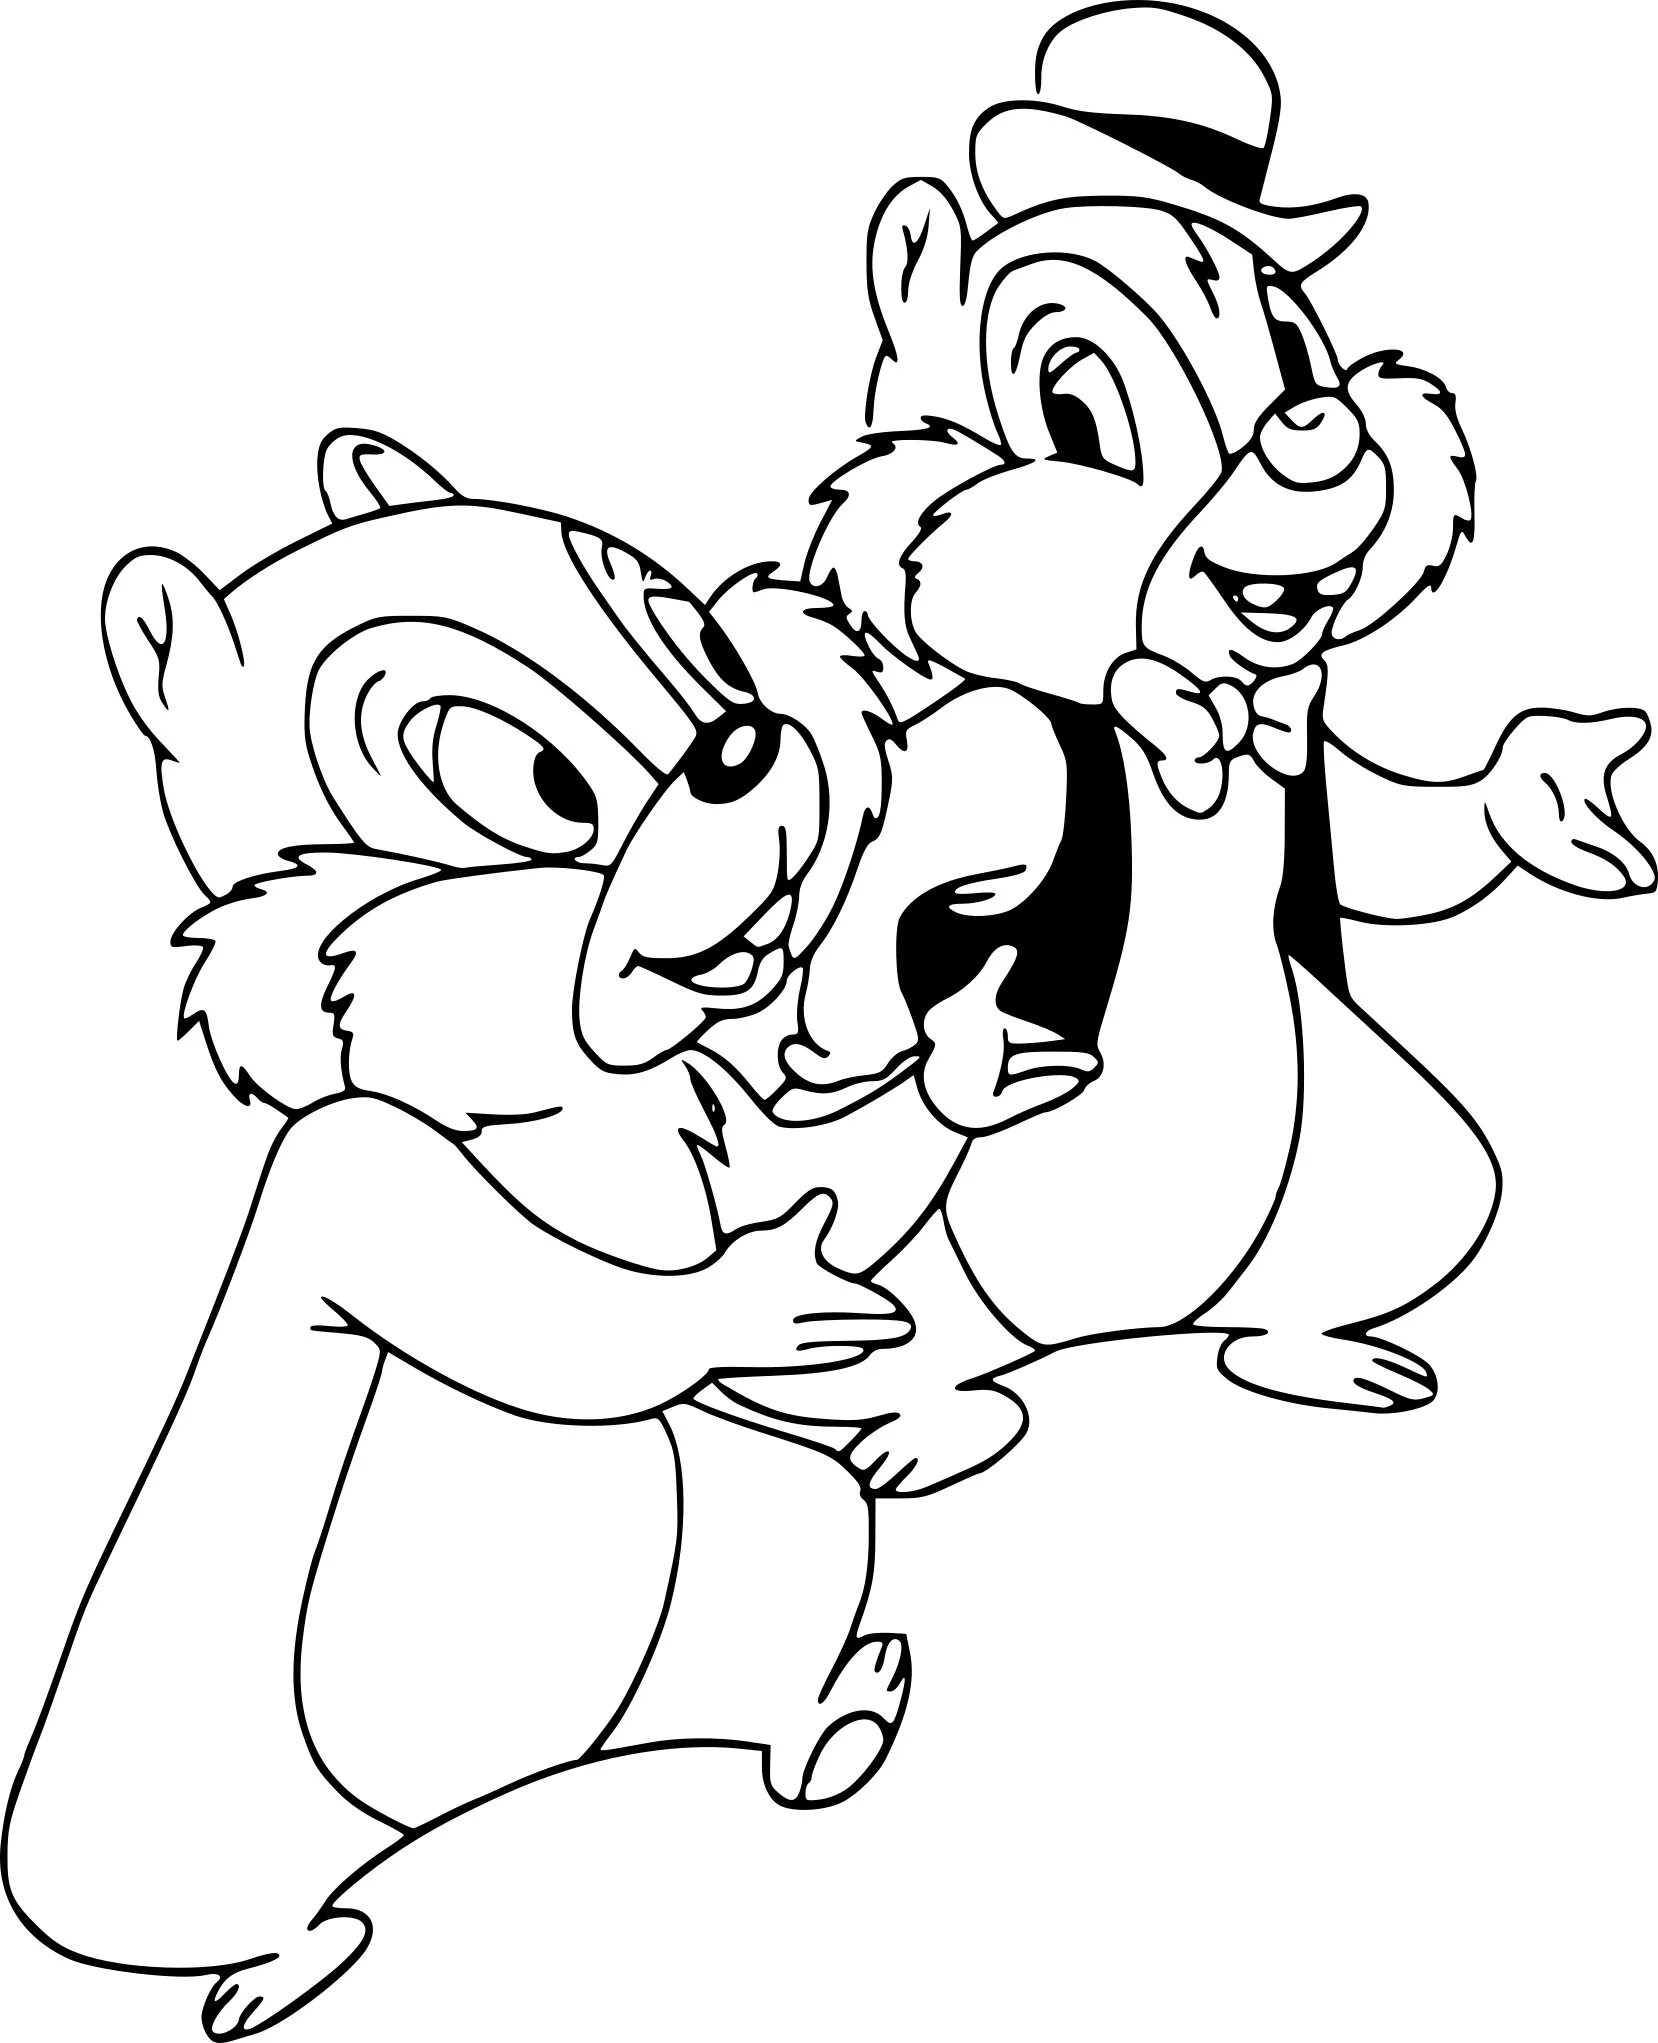 Awesome chip and dale coloring pages for kids